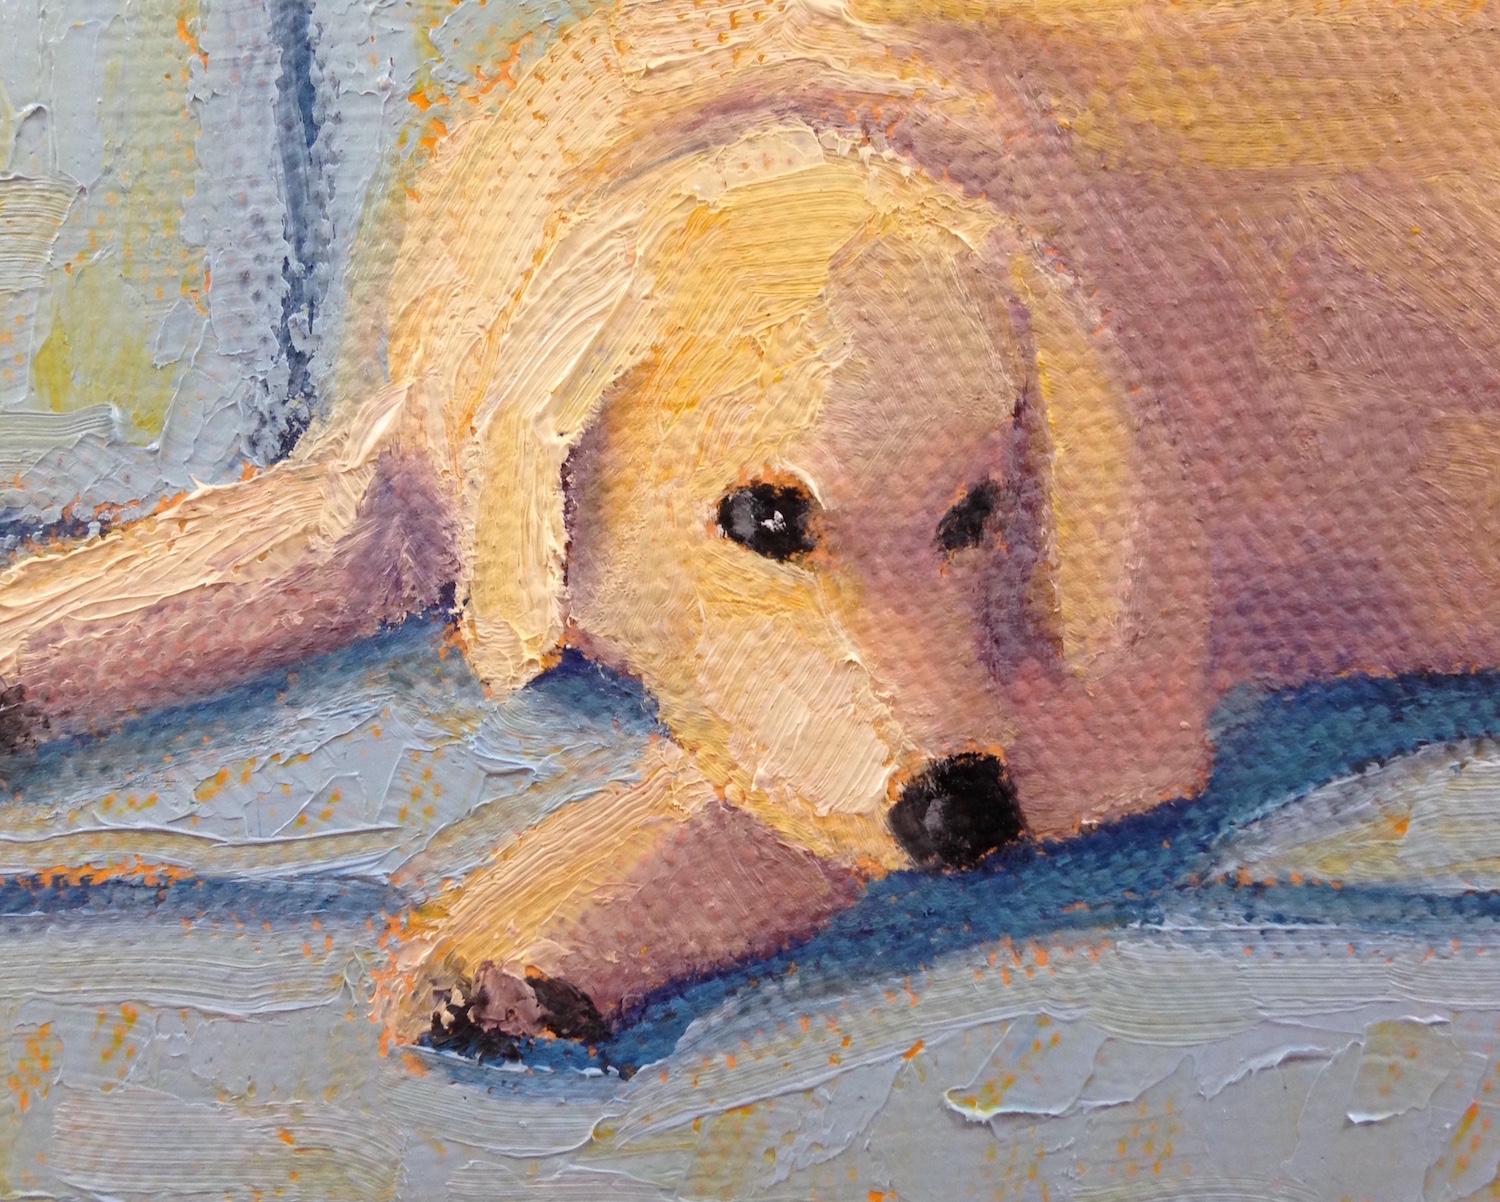 <p>Artist Comments<br />A yellow lab taking a midday nap on the couch. Abstract artwork above the sofa balances the composition. Graphic, simplified forms create a welcoming atmosphere. Pat Doherty's latest series depicts living room scenes with a